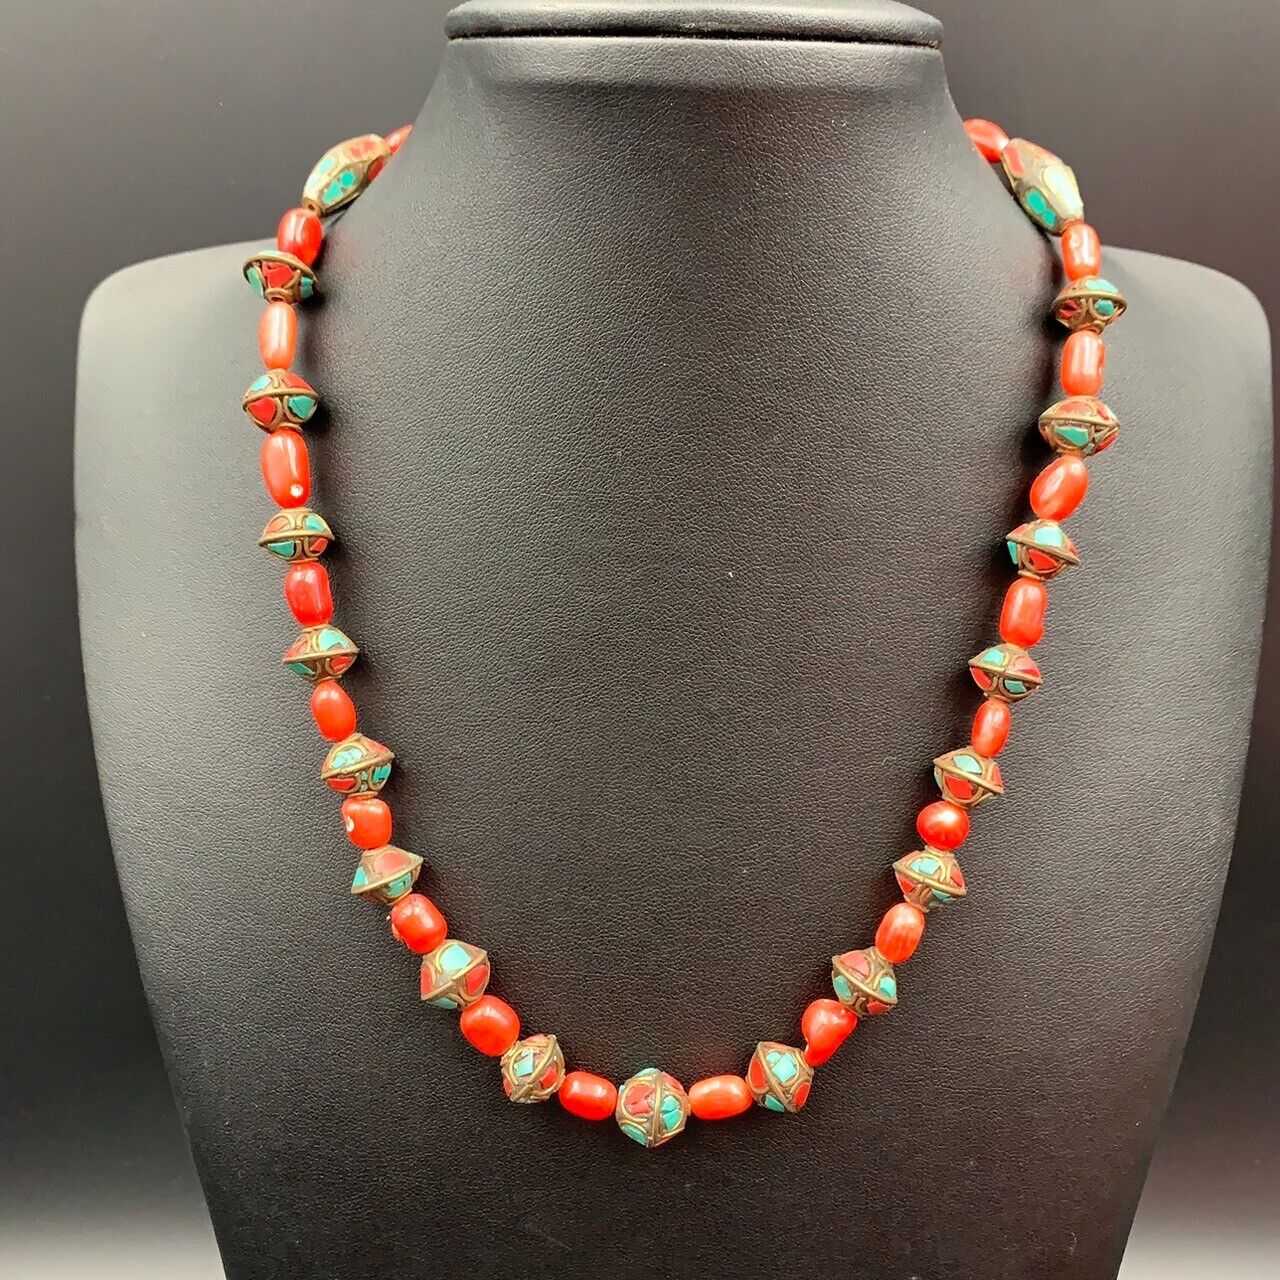 Awesome Natural Dyed Coral With Nepalese Handmade Vintage Beads Necklace. - Image 3 of 5